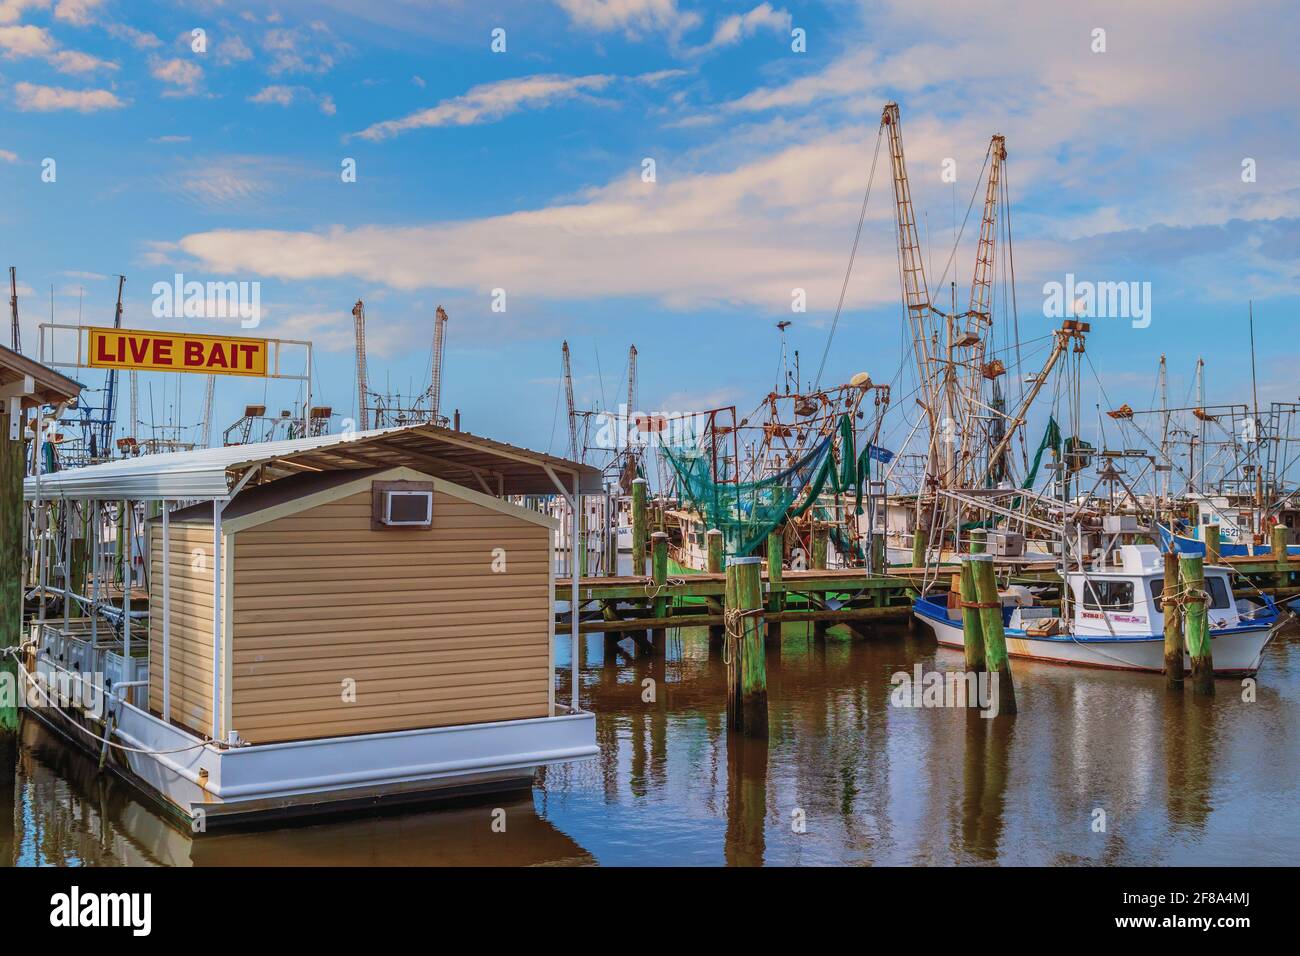 Shrimp Boats and Live Bait shop in Pass Christian Harbor, Mississippi Gulf Coast, USA. Stock Photo